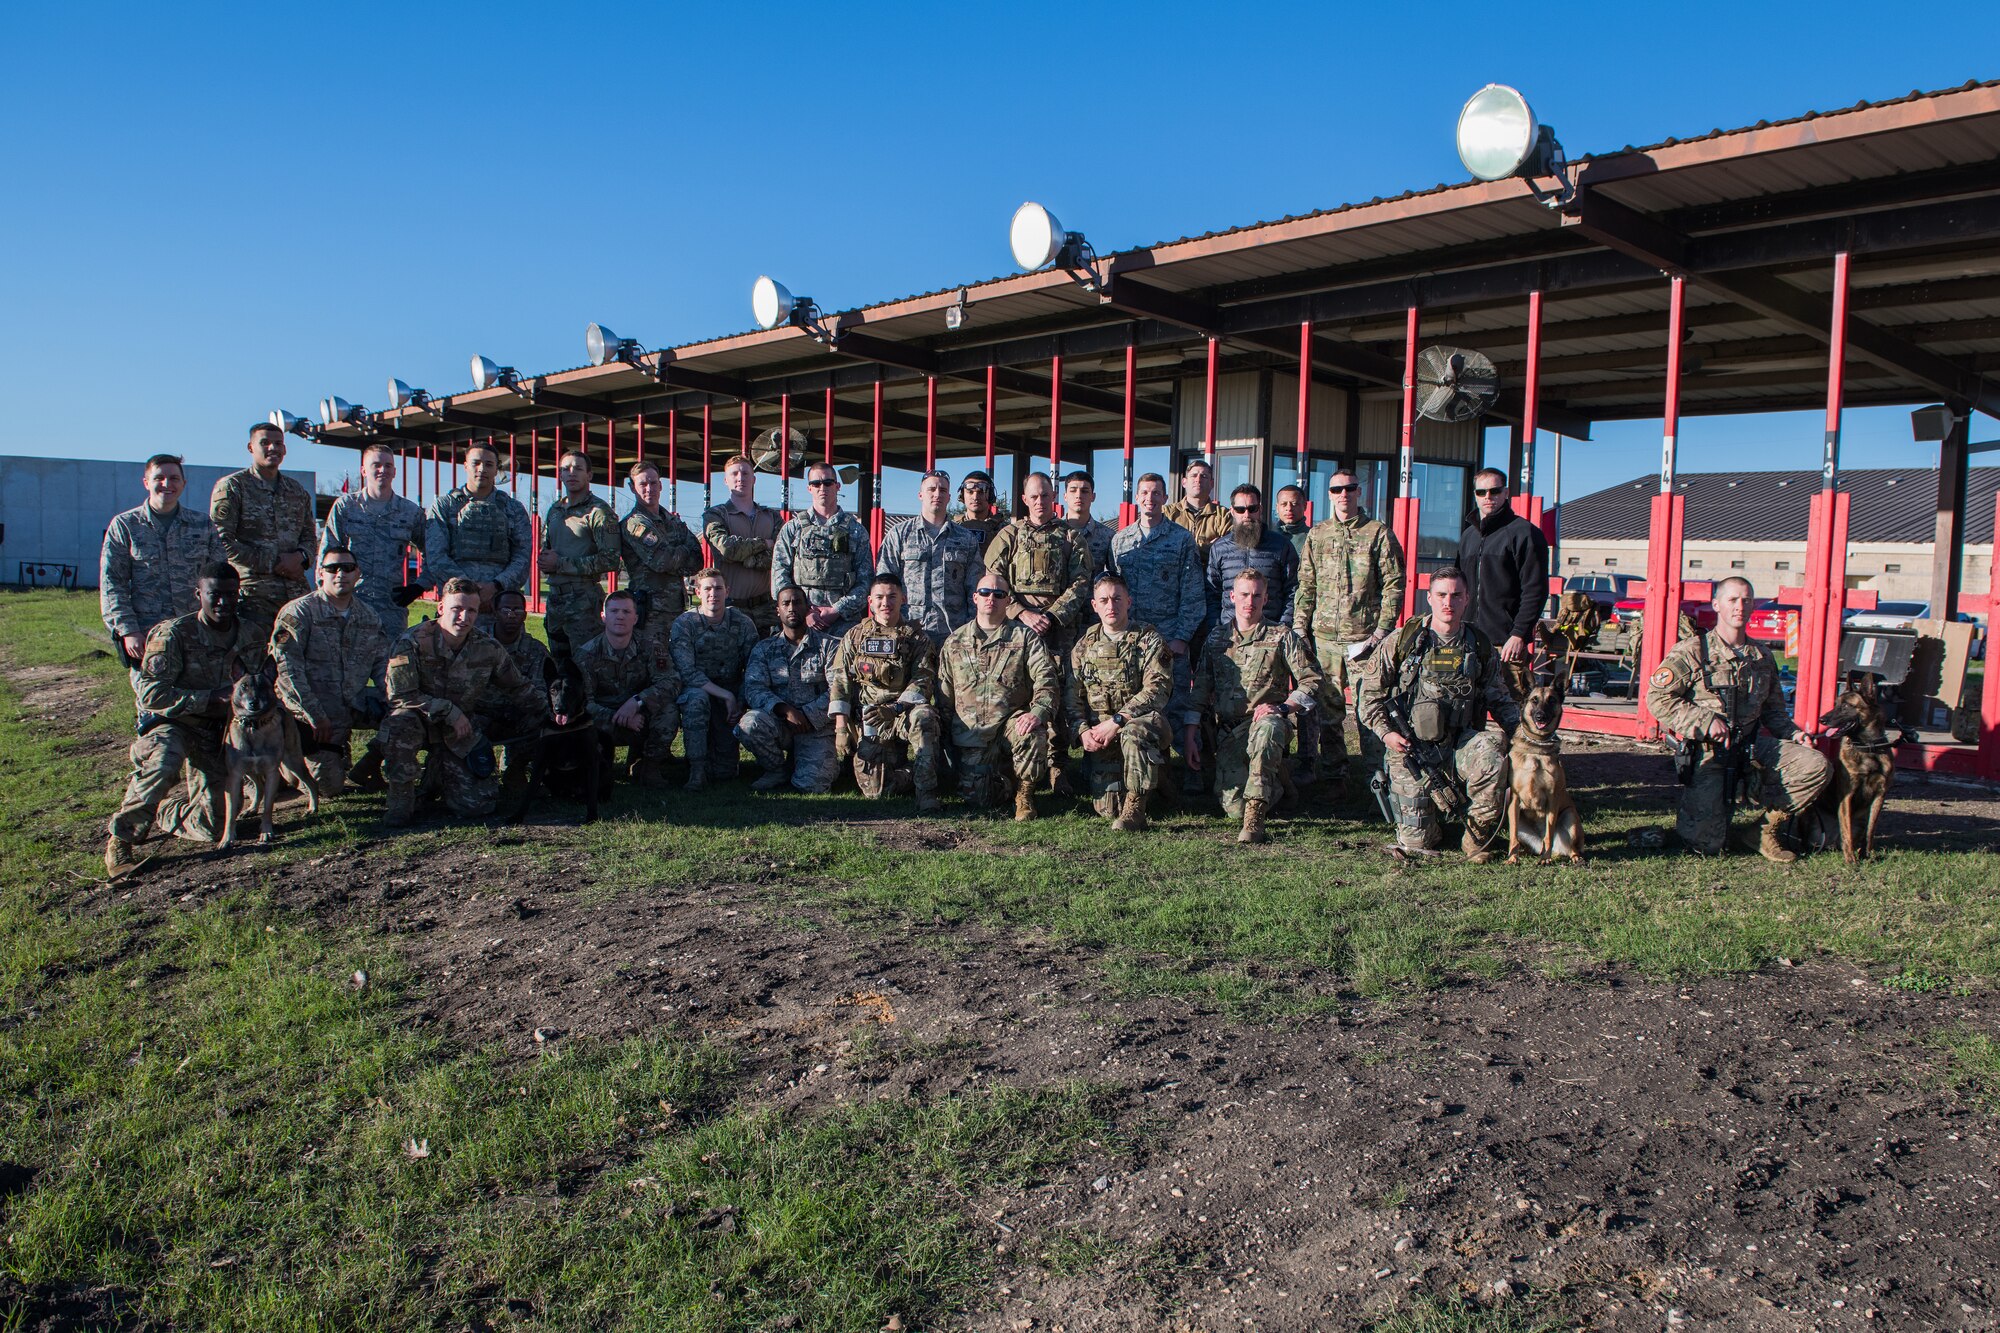 U.S. Air Force Security Forces Airmen pose for a group photo before the firing range portion of the Air Education and Training Command Defender Challenge team tryout at Joint Base San Antonio-Medina Annex, Texas, Jan. 29, 2020. The five-day selection camp includes a physical fitness test, M-9 and M-4 weapons firing, the alpha warrior obstacle course, a ruck march and also includes a military working dog tryout as well. A total of 27 Airmen, including five MWD handlers and their canine partners, were invited to tryout for the team. The seven selectees to the AETC team will represent the First Command at the career field’s world-wide competition that will be held at JBSA-Camp Bullis in May 2020. (U.S. Air Force photo by Sarayuth Pinthong)